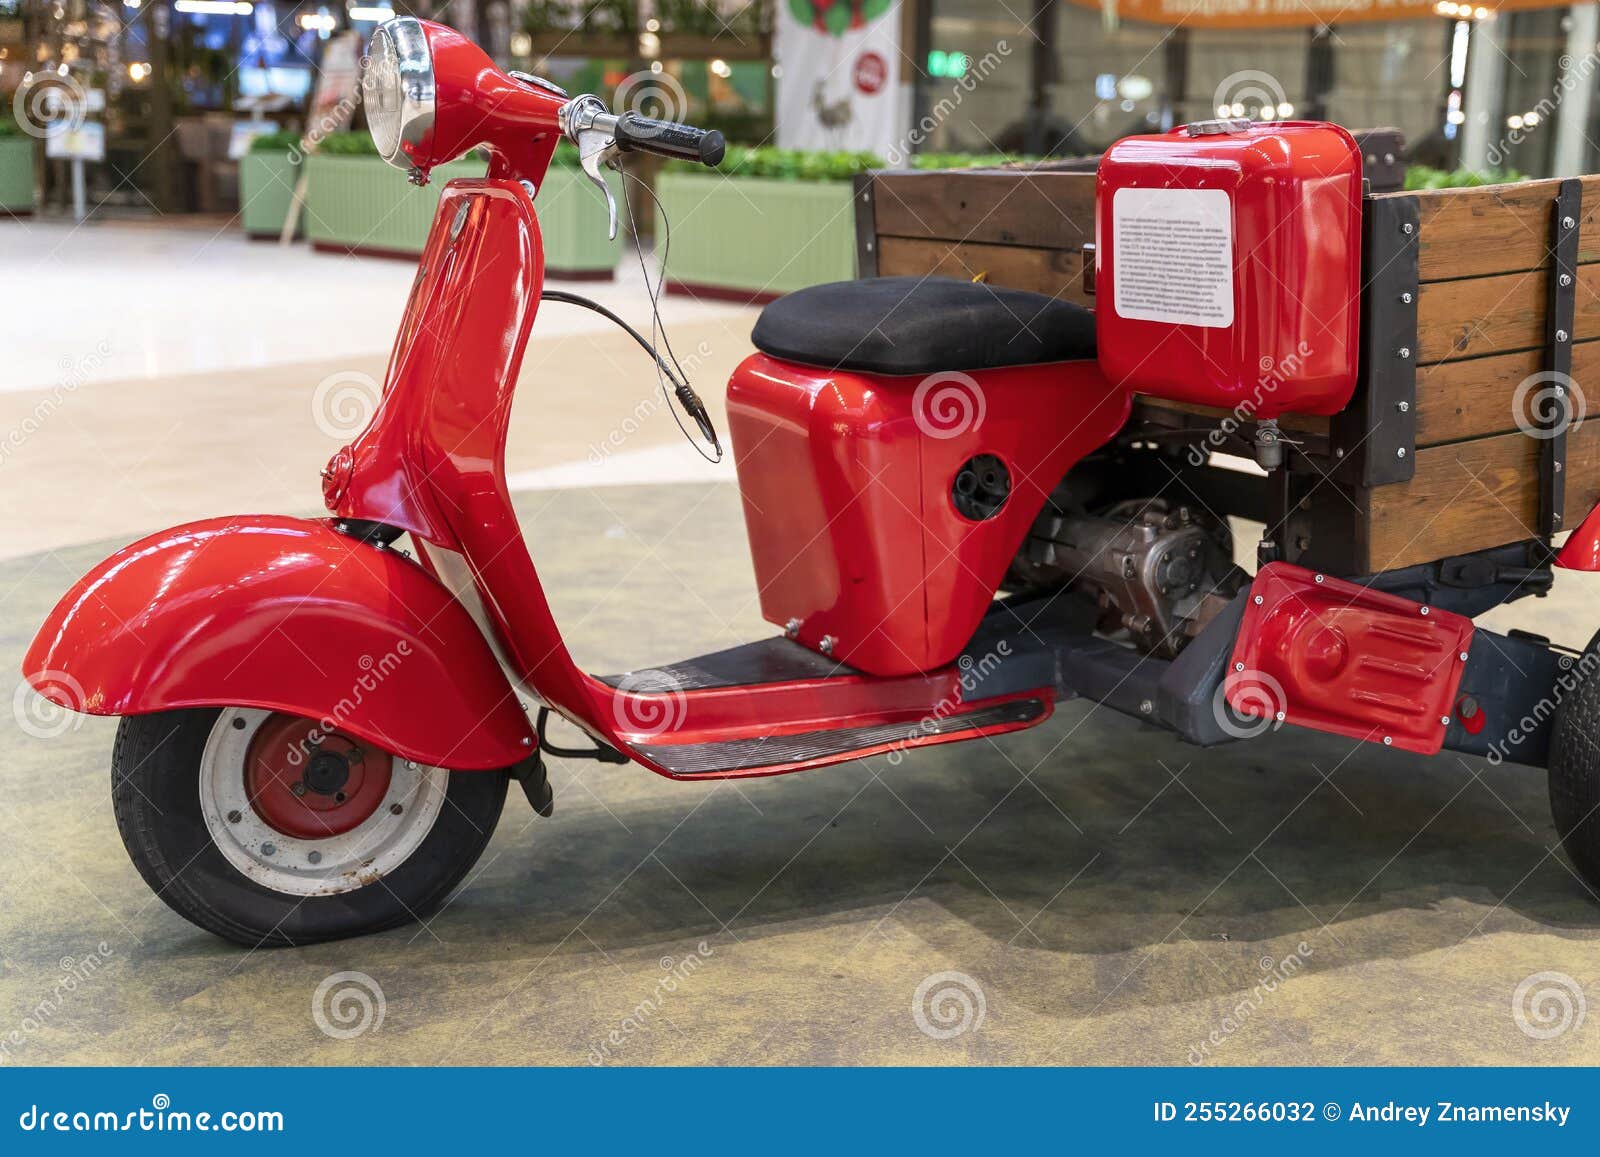 Scooter Ant. Old Soviet Motor Scooter on Three Wheels with a Cart Stock  Image - Image of memory, graves: 111893521